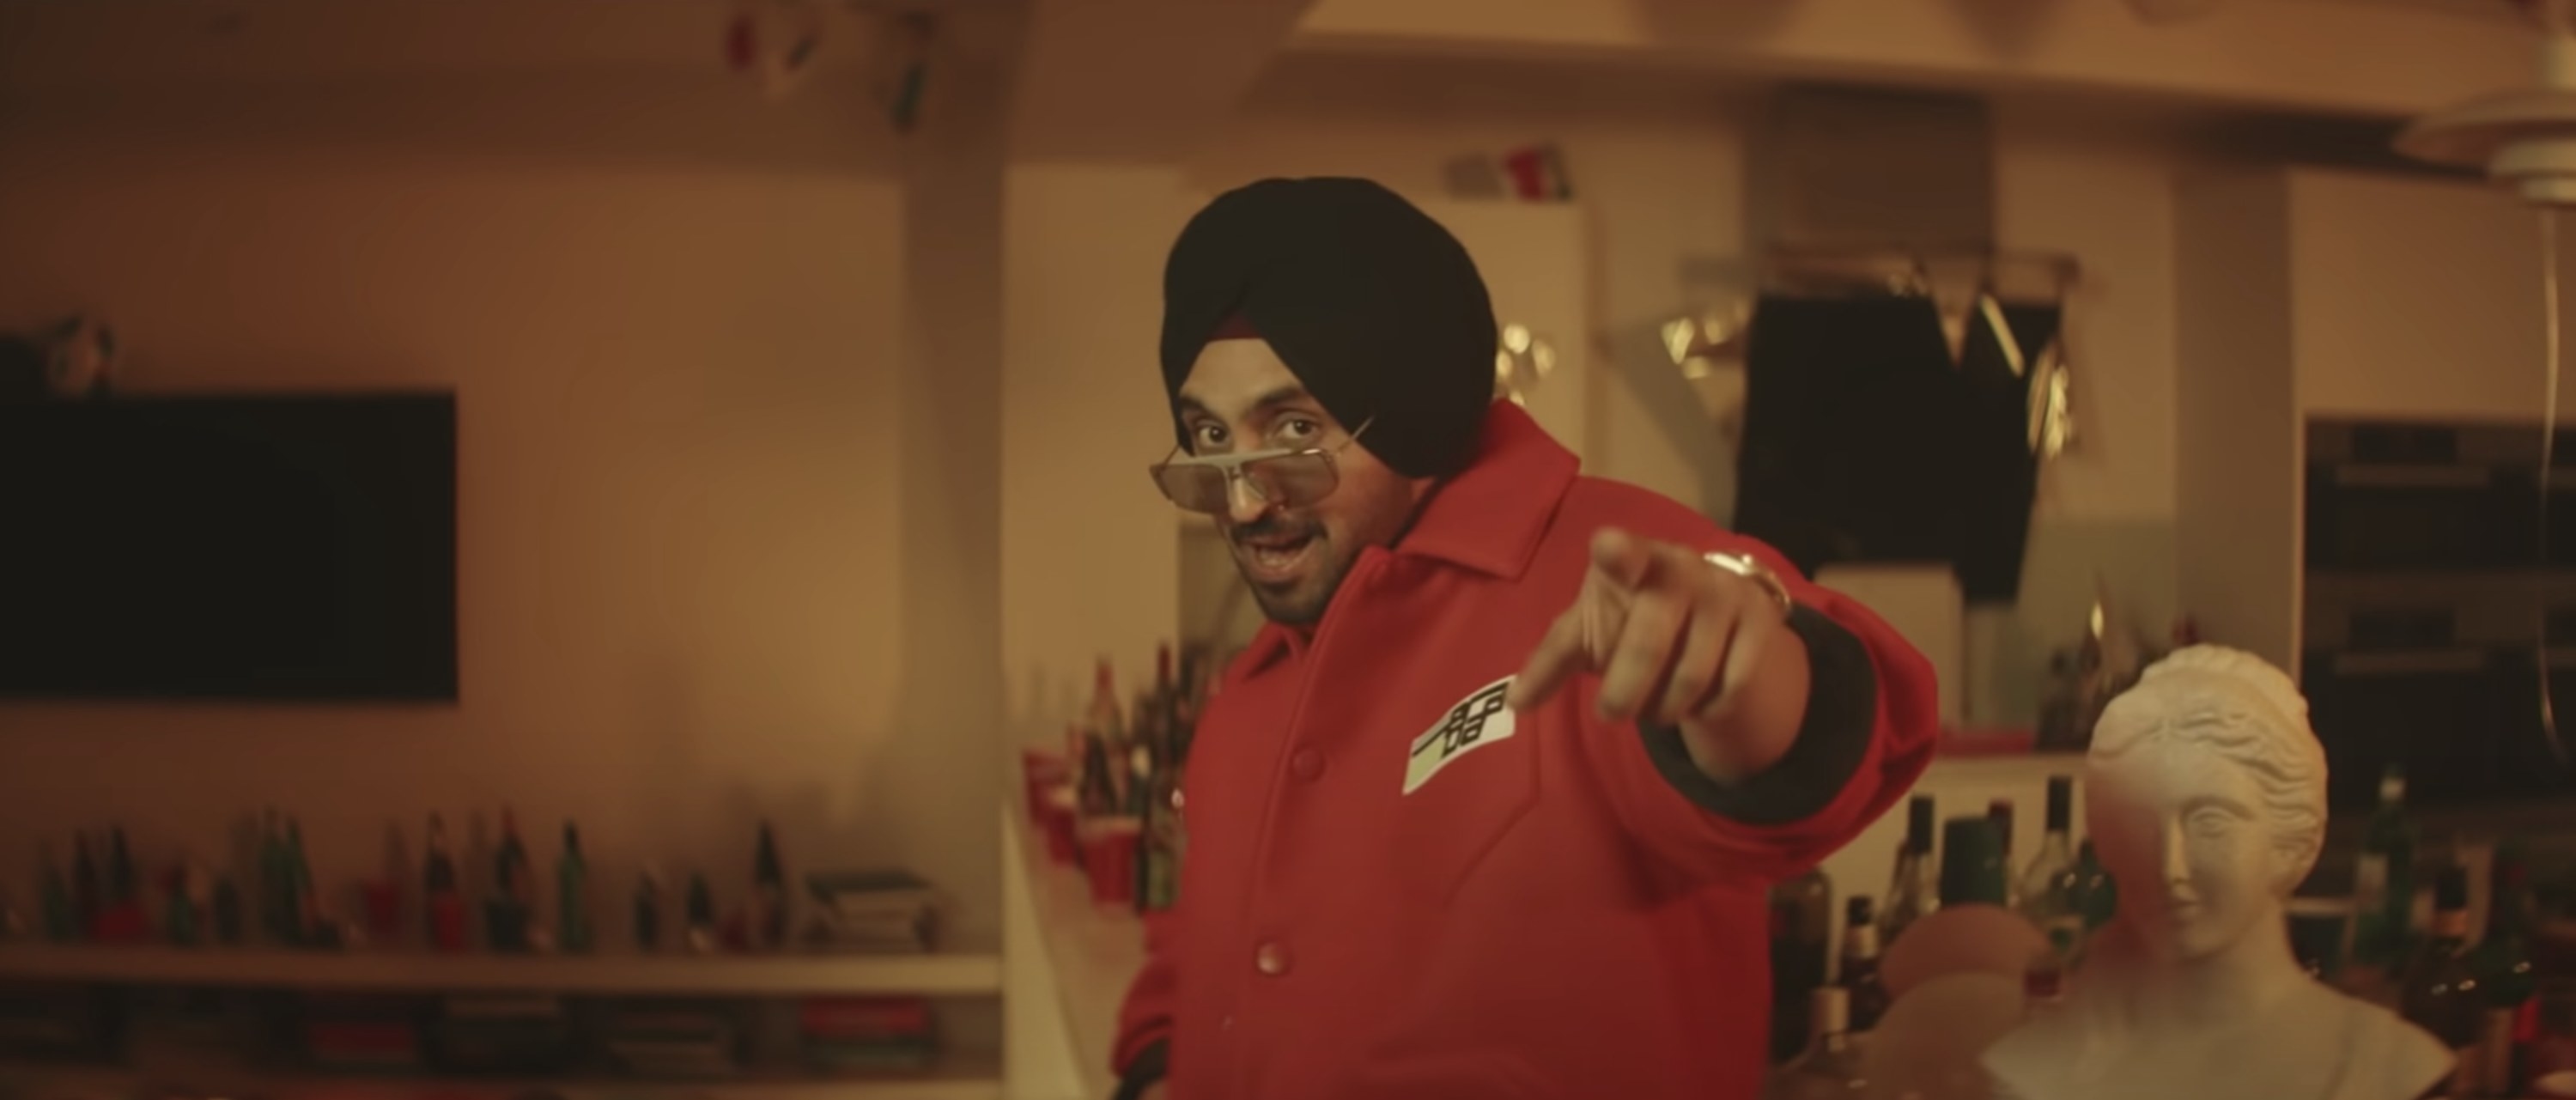 Diljit Dosanjh singing in the &quot;Jind Mahi&quot; music video.